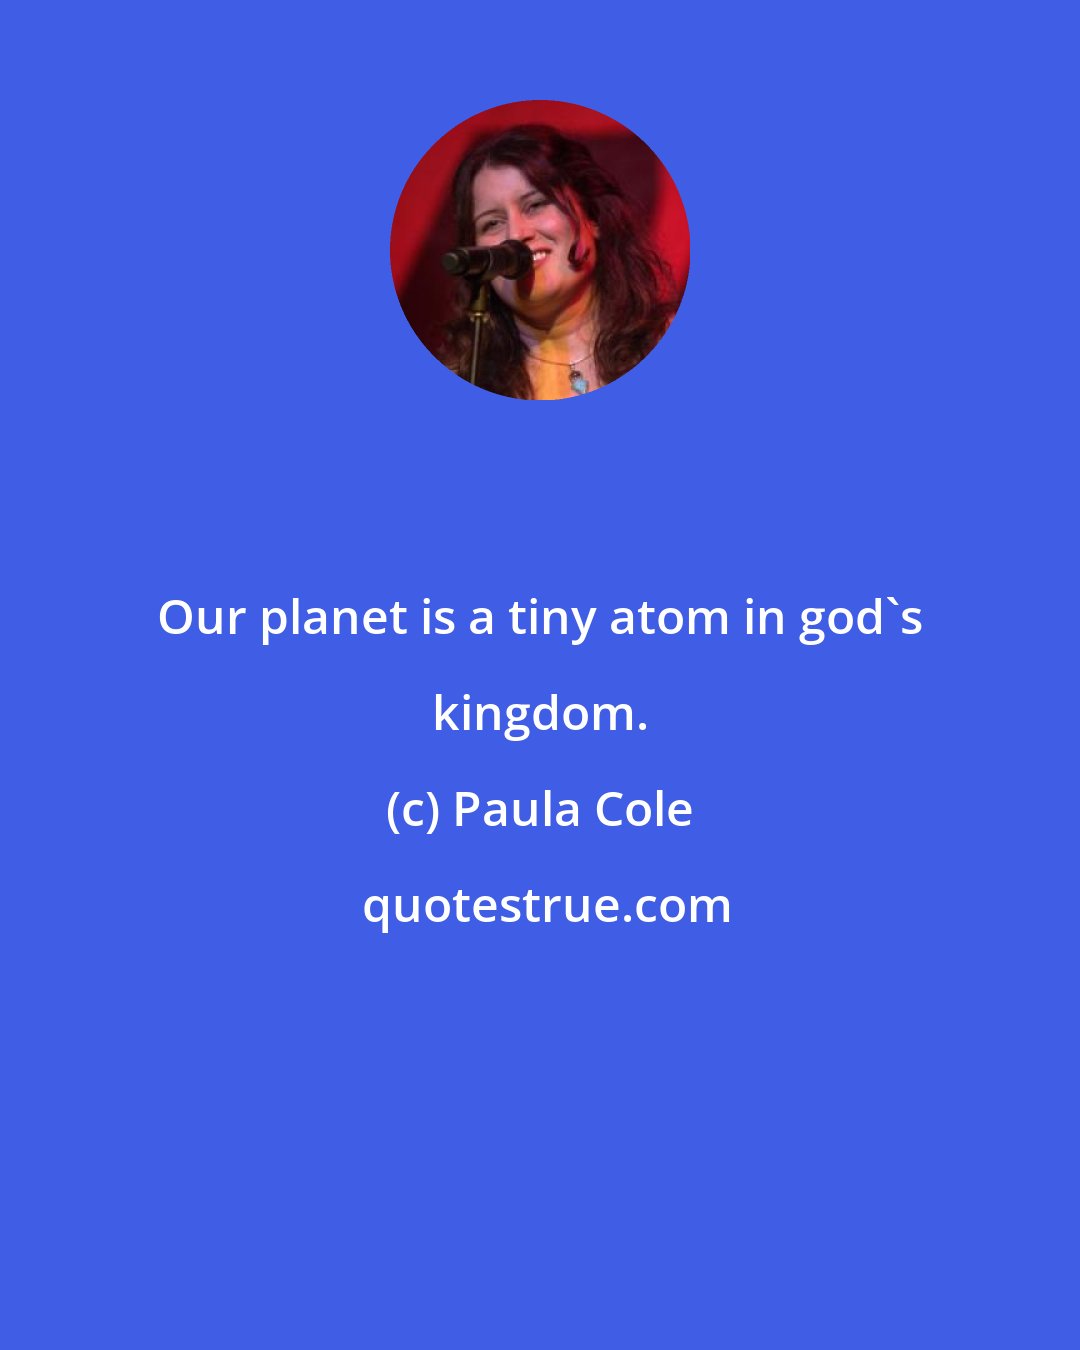 Paula Cole: Our planet is a tiny atom in god's kingdom.